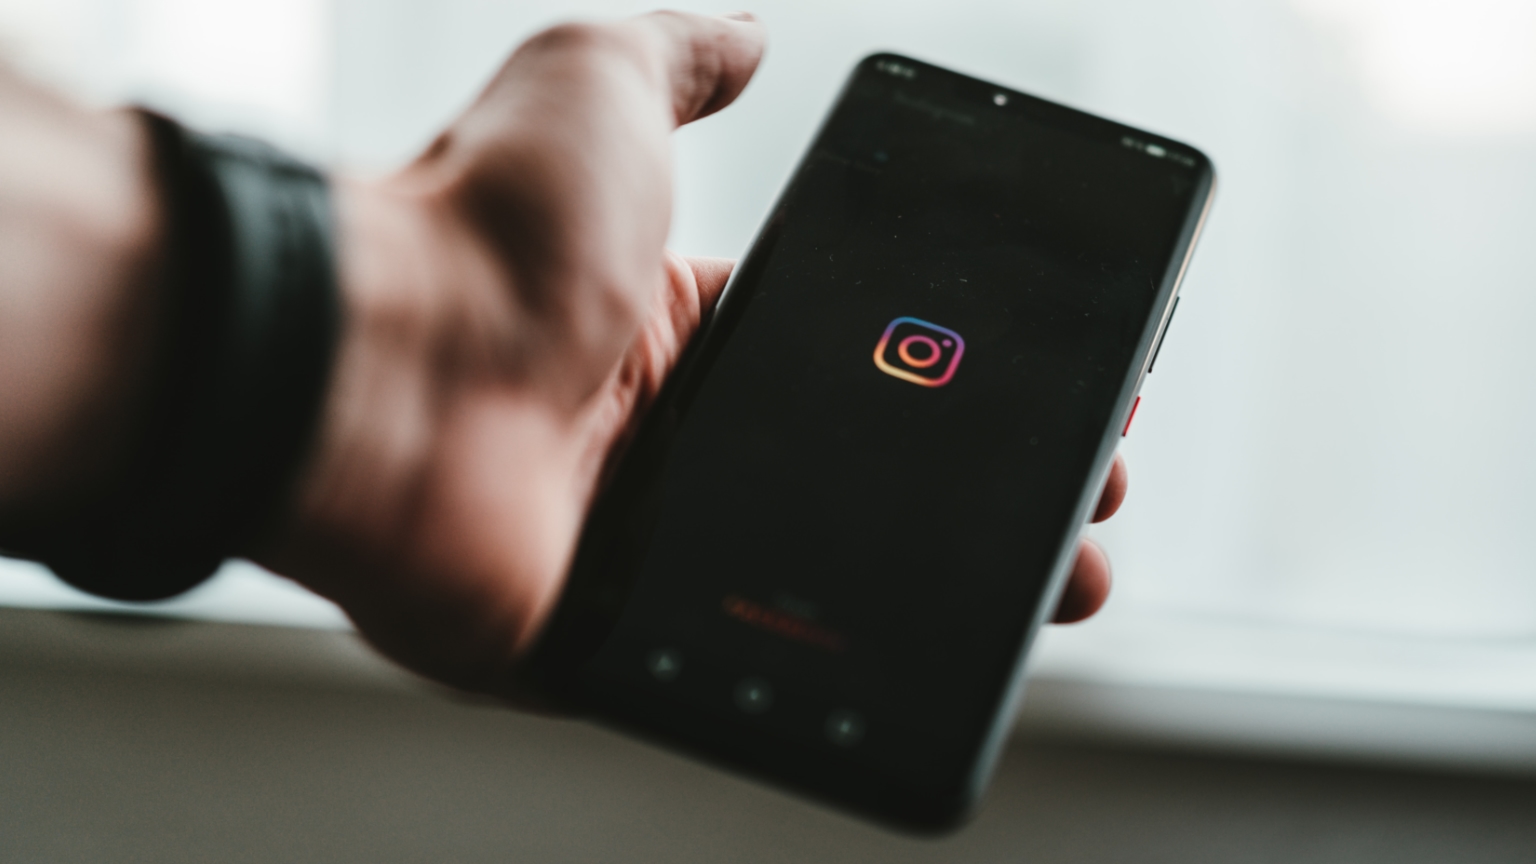 Instagram to automatically censor “a predefined list of offensive terms”